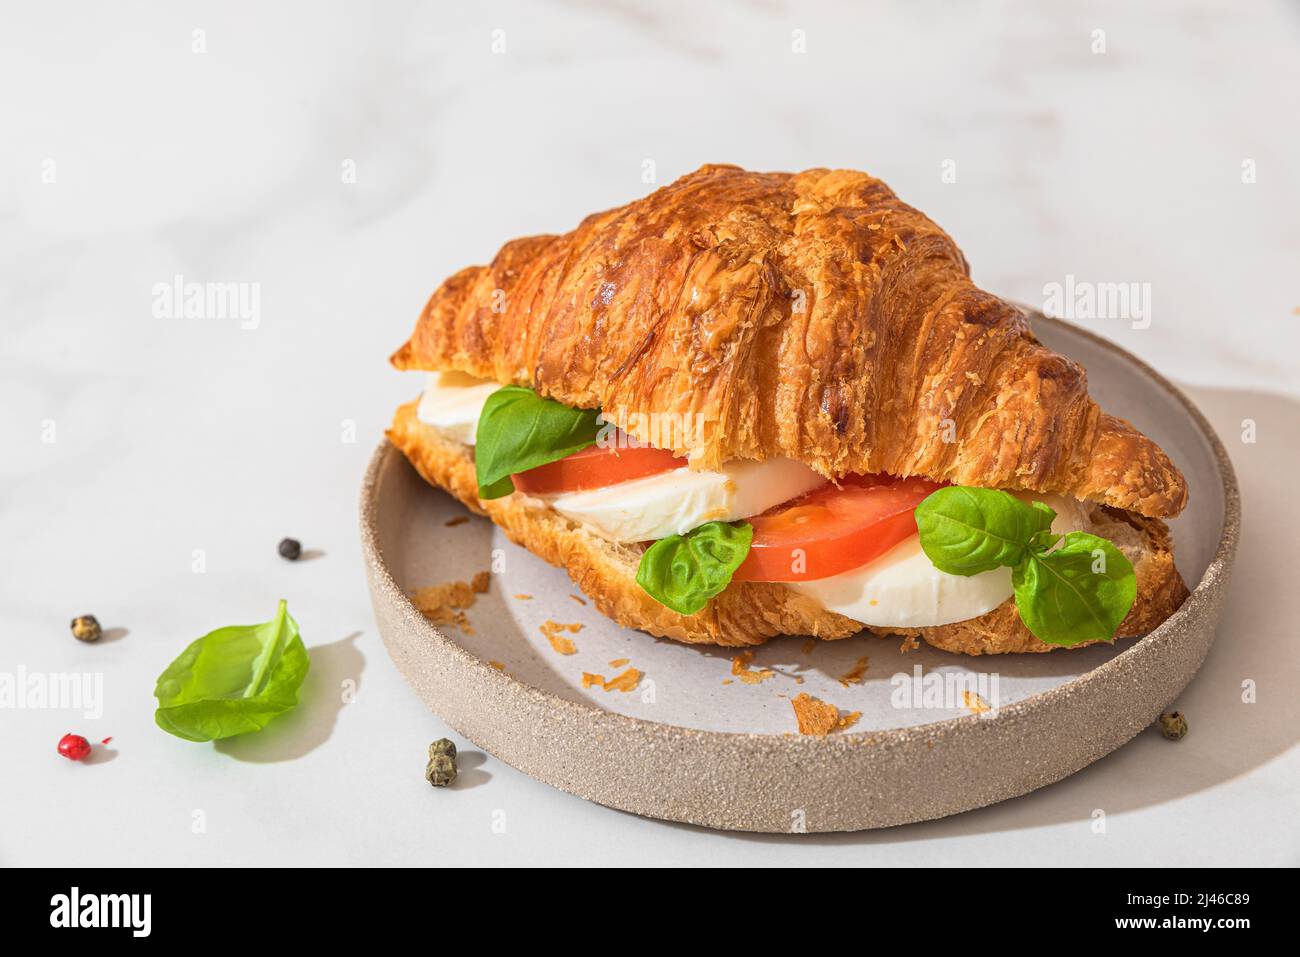 Croissant sandwich with mozzarella, tomato and basil in a plate on white background. Italian breakfast. Tasty food Stock Photo